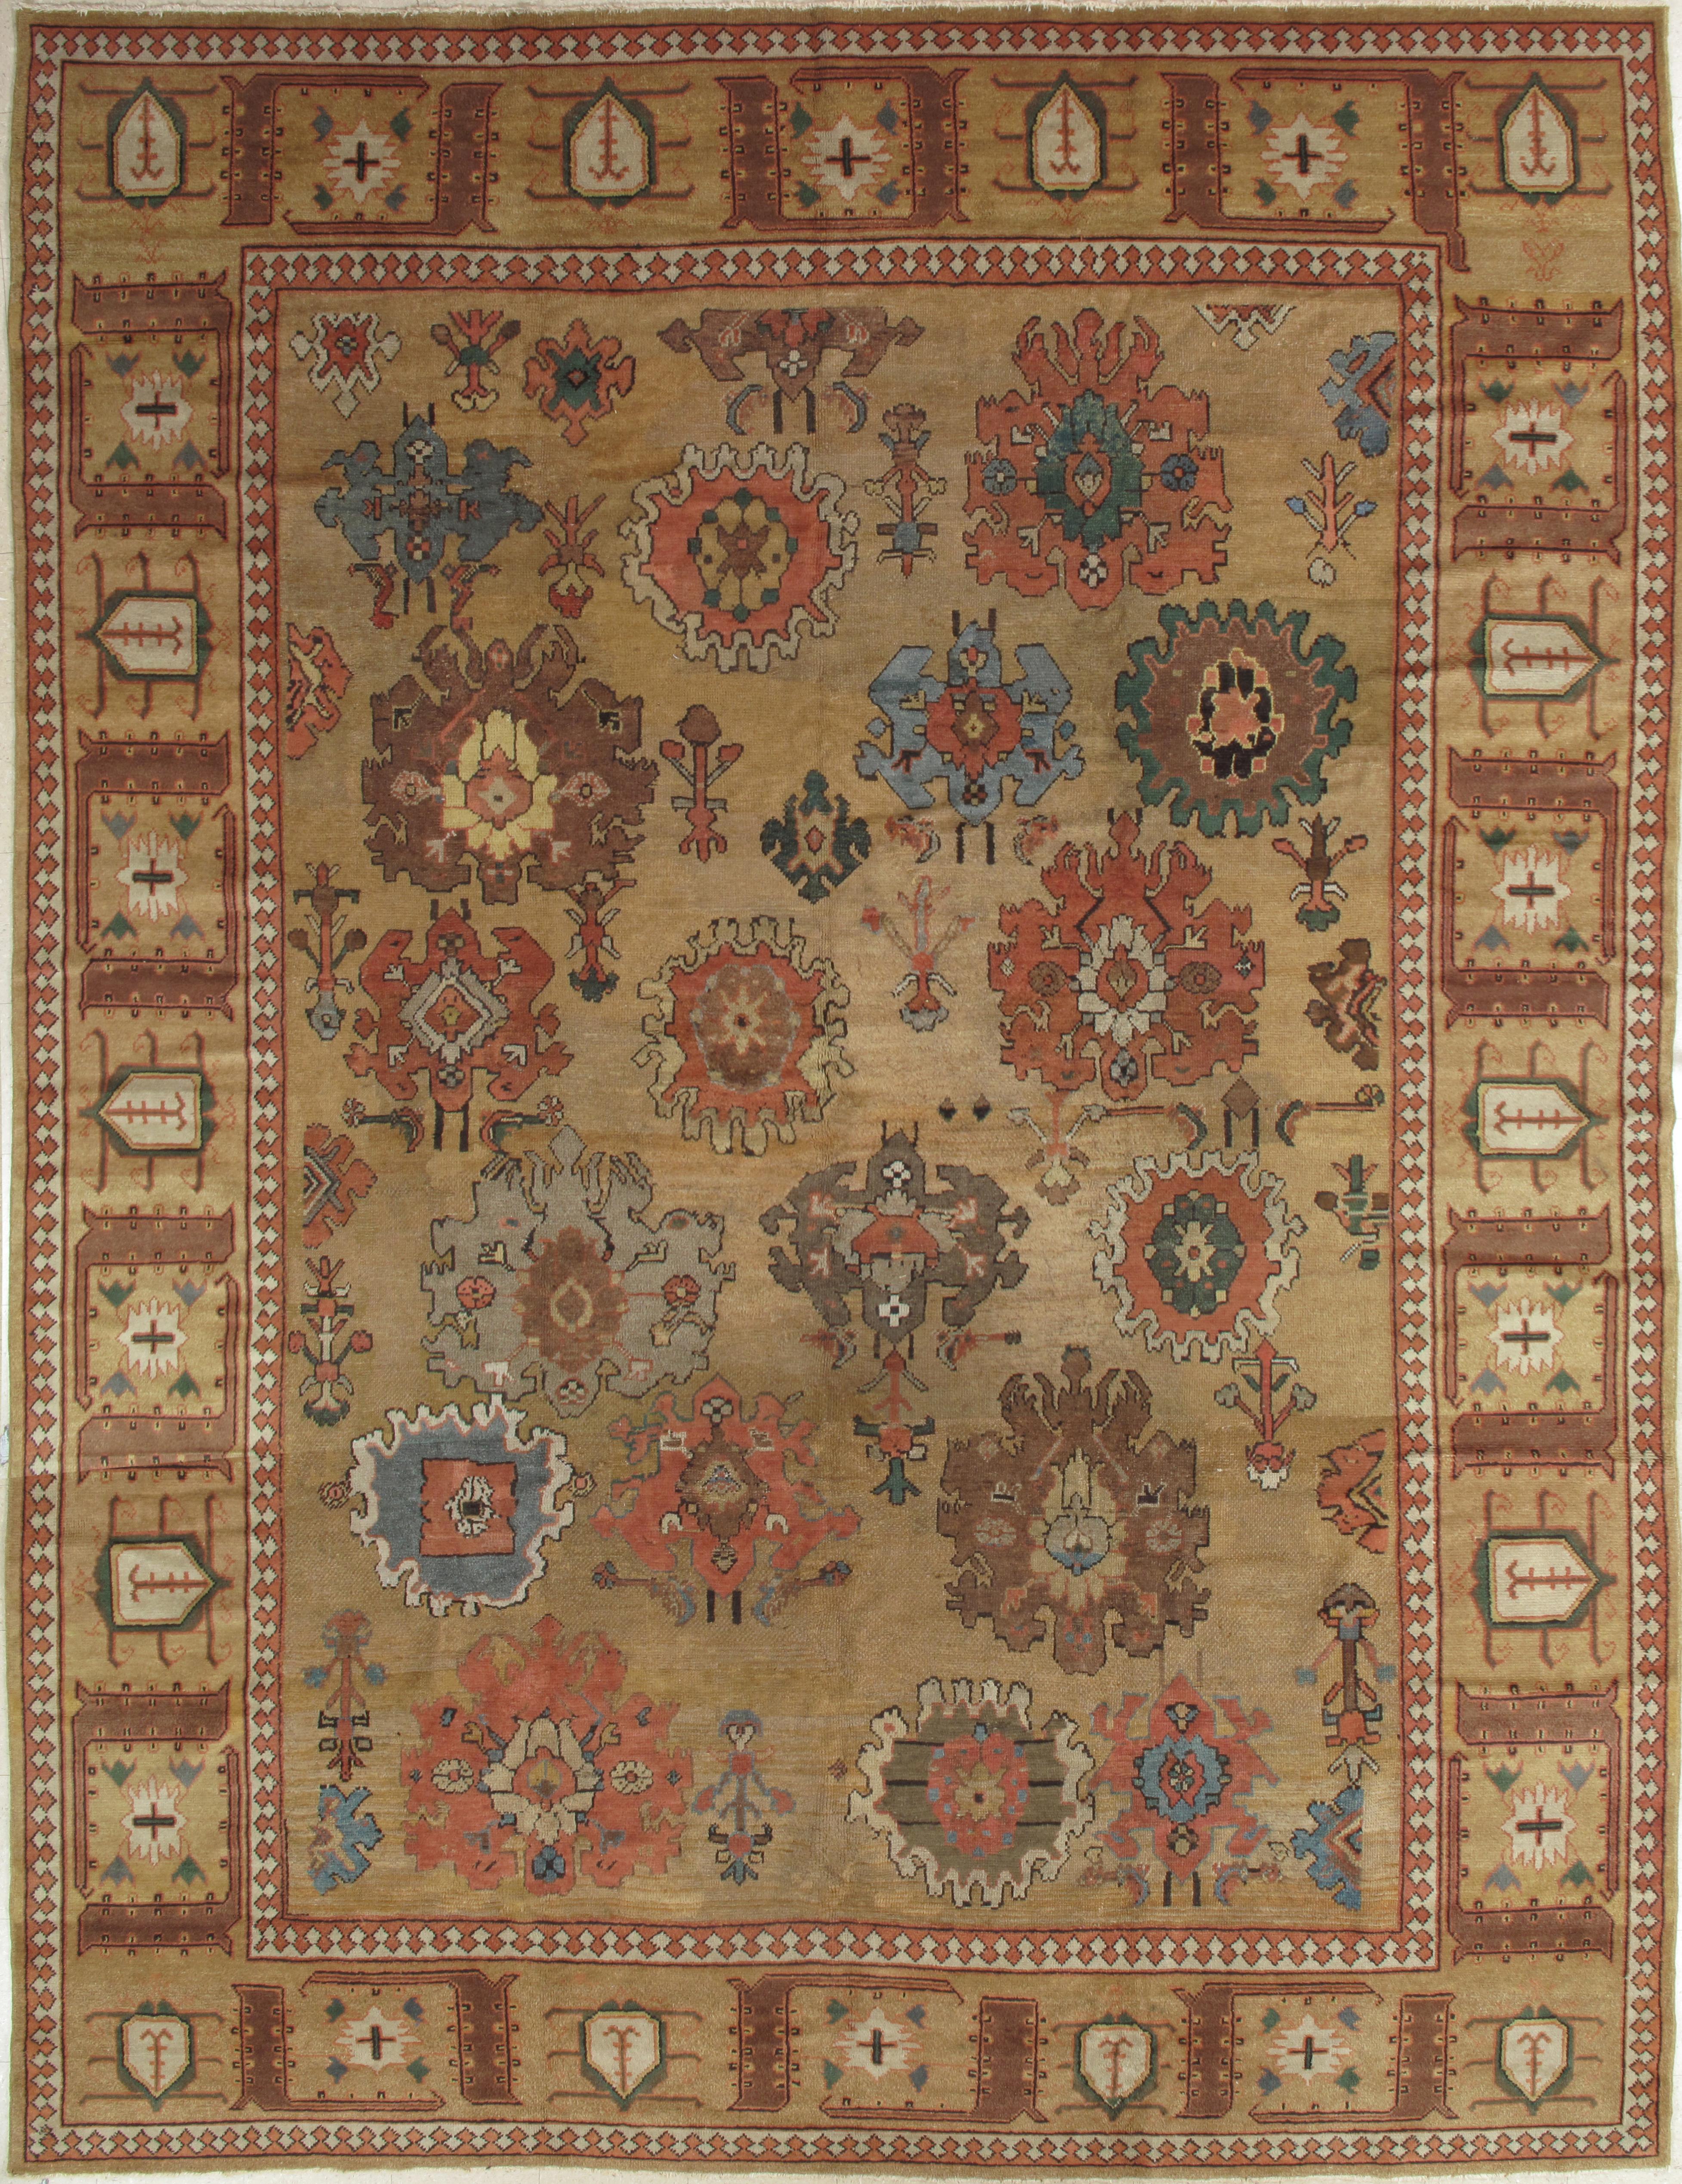 Antique Bakshaish Carpet, Oriental Persian Handmade in Tan Brown, Blue and Red In Good Condition For Sale In Port Washington, NY